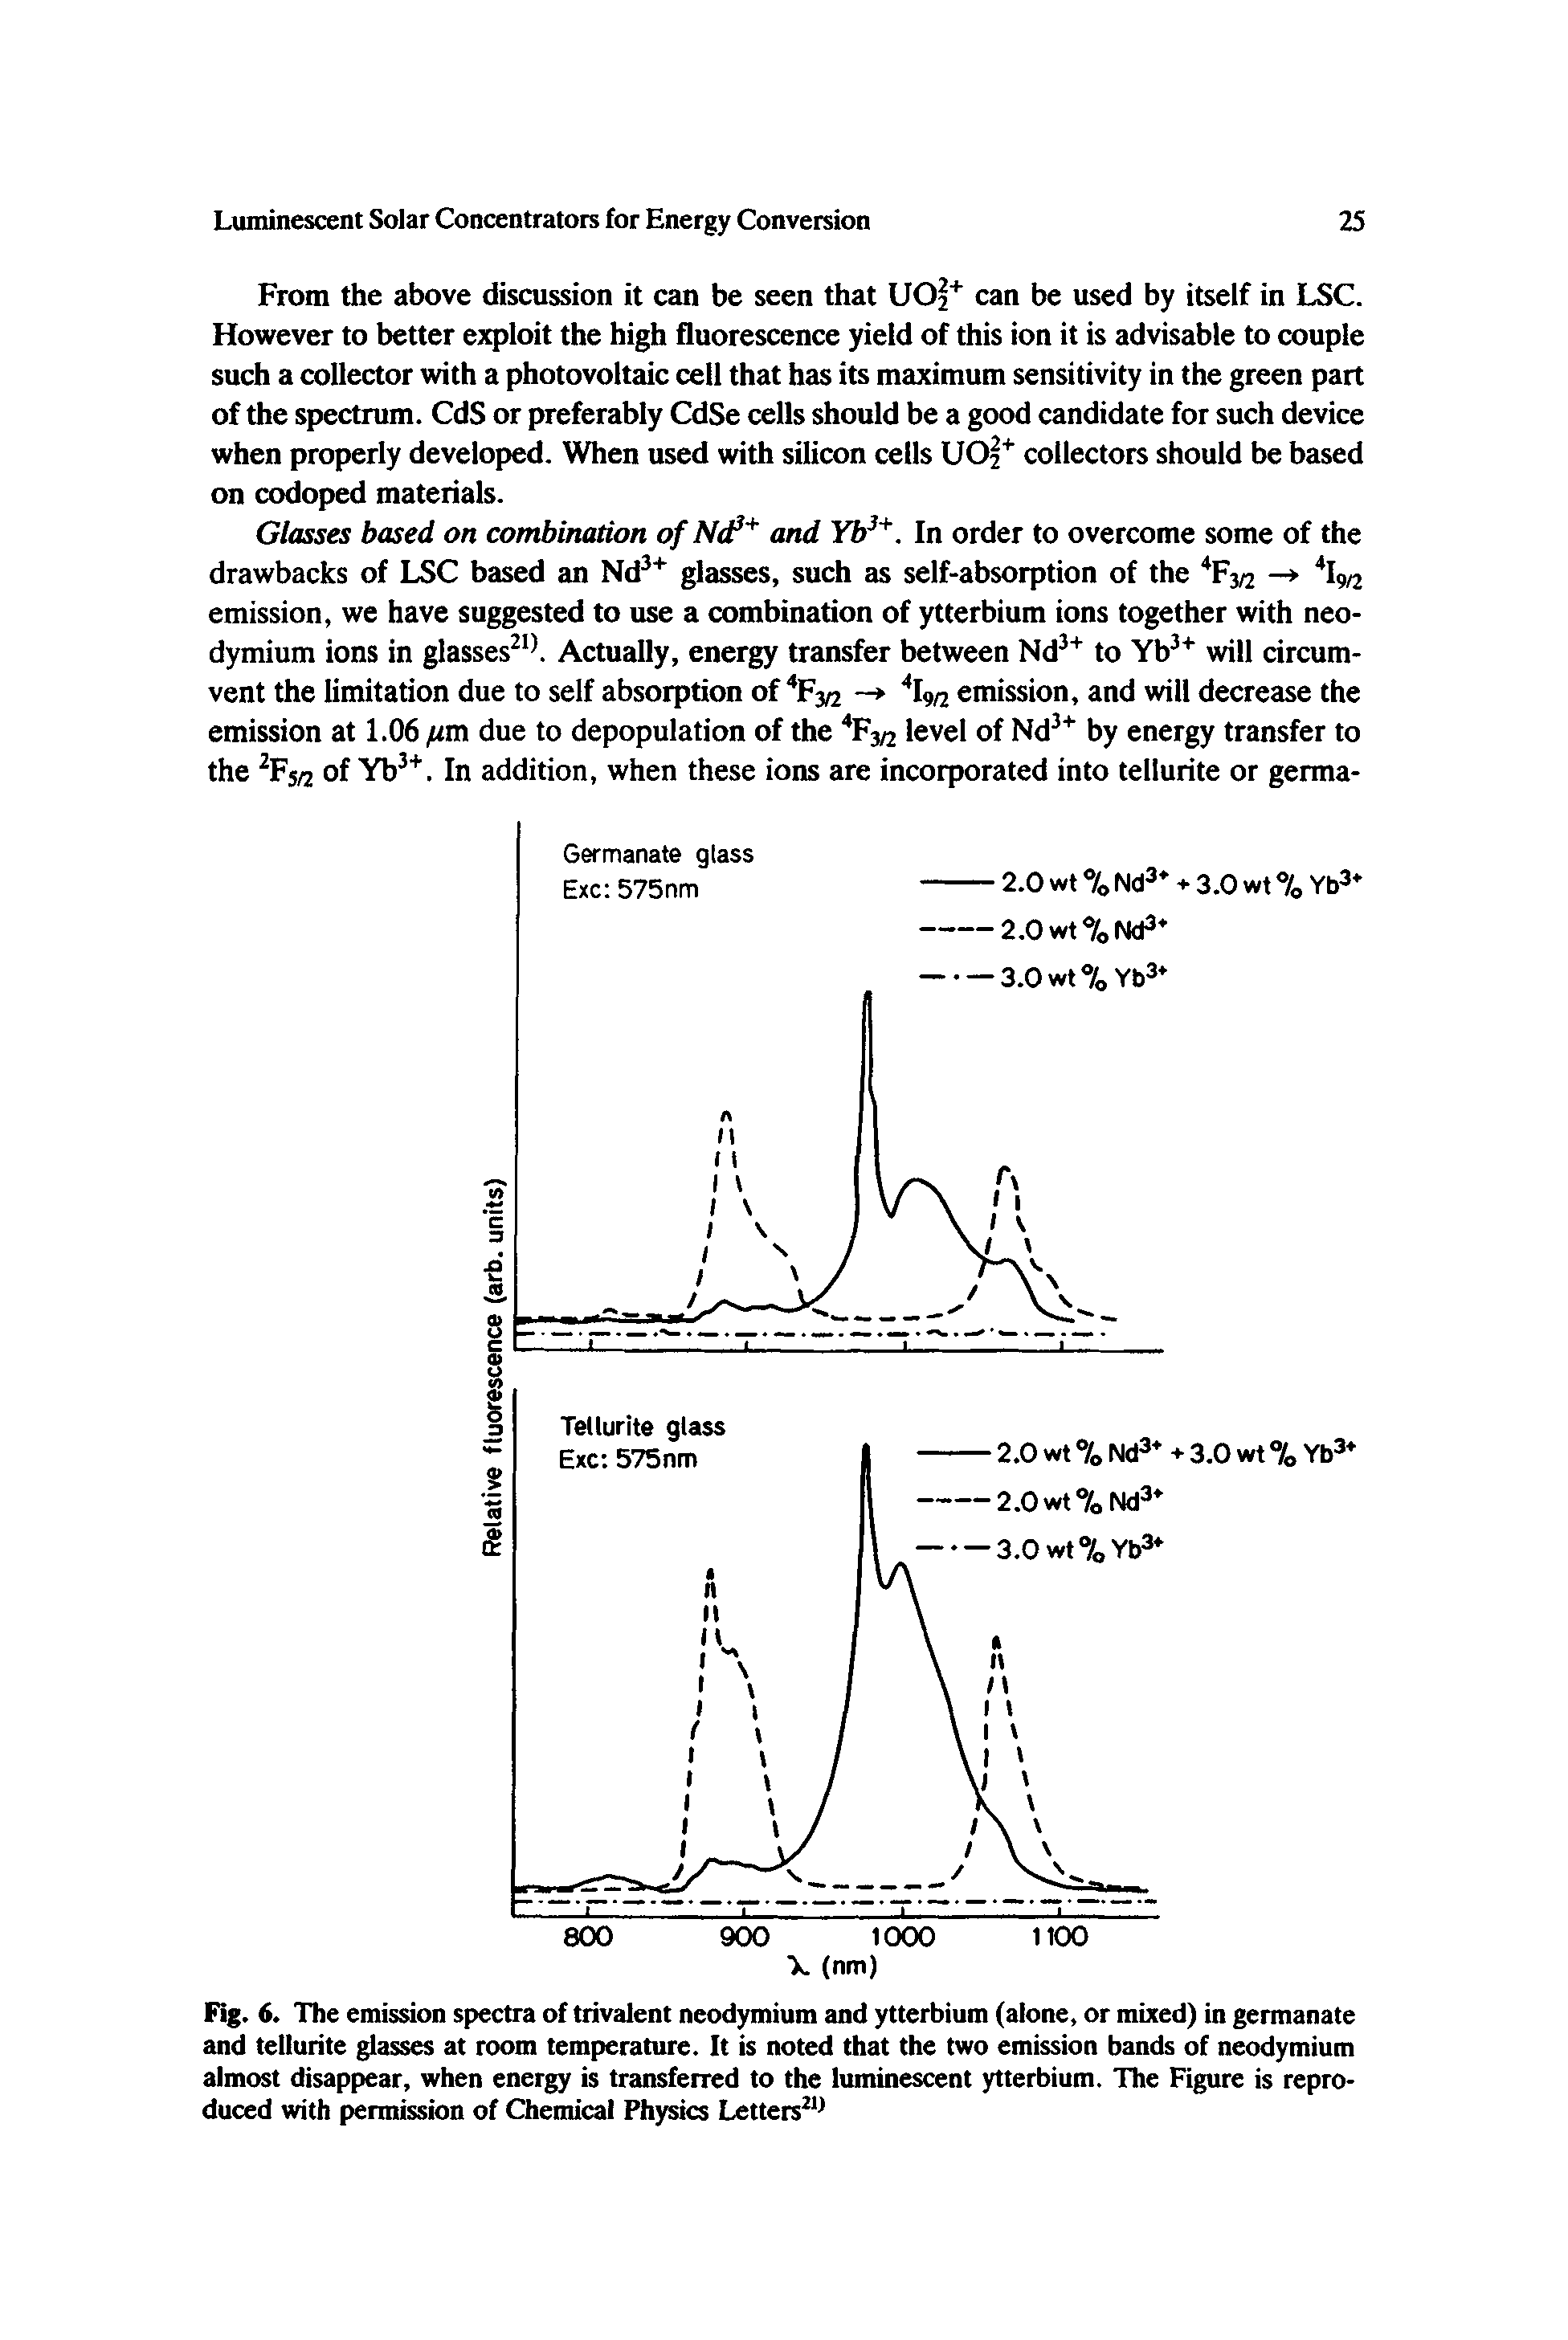 Fig. 6. The emission spectra of trivalent neodymium and ytterbium (alone, or mixed) in germanate and tellurite glasses at room temperature. It is noted that the two emission bands of neodymium almost disappear, when energy is transferred to the luminescent ytterbium. The Figure is reproduced with permission of Chemical Physics Letters211...